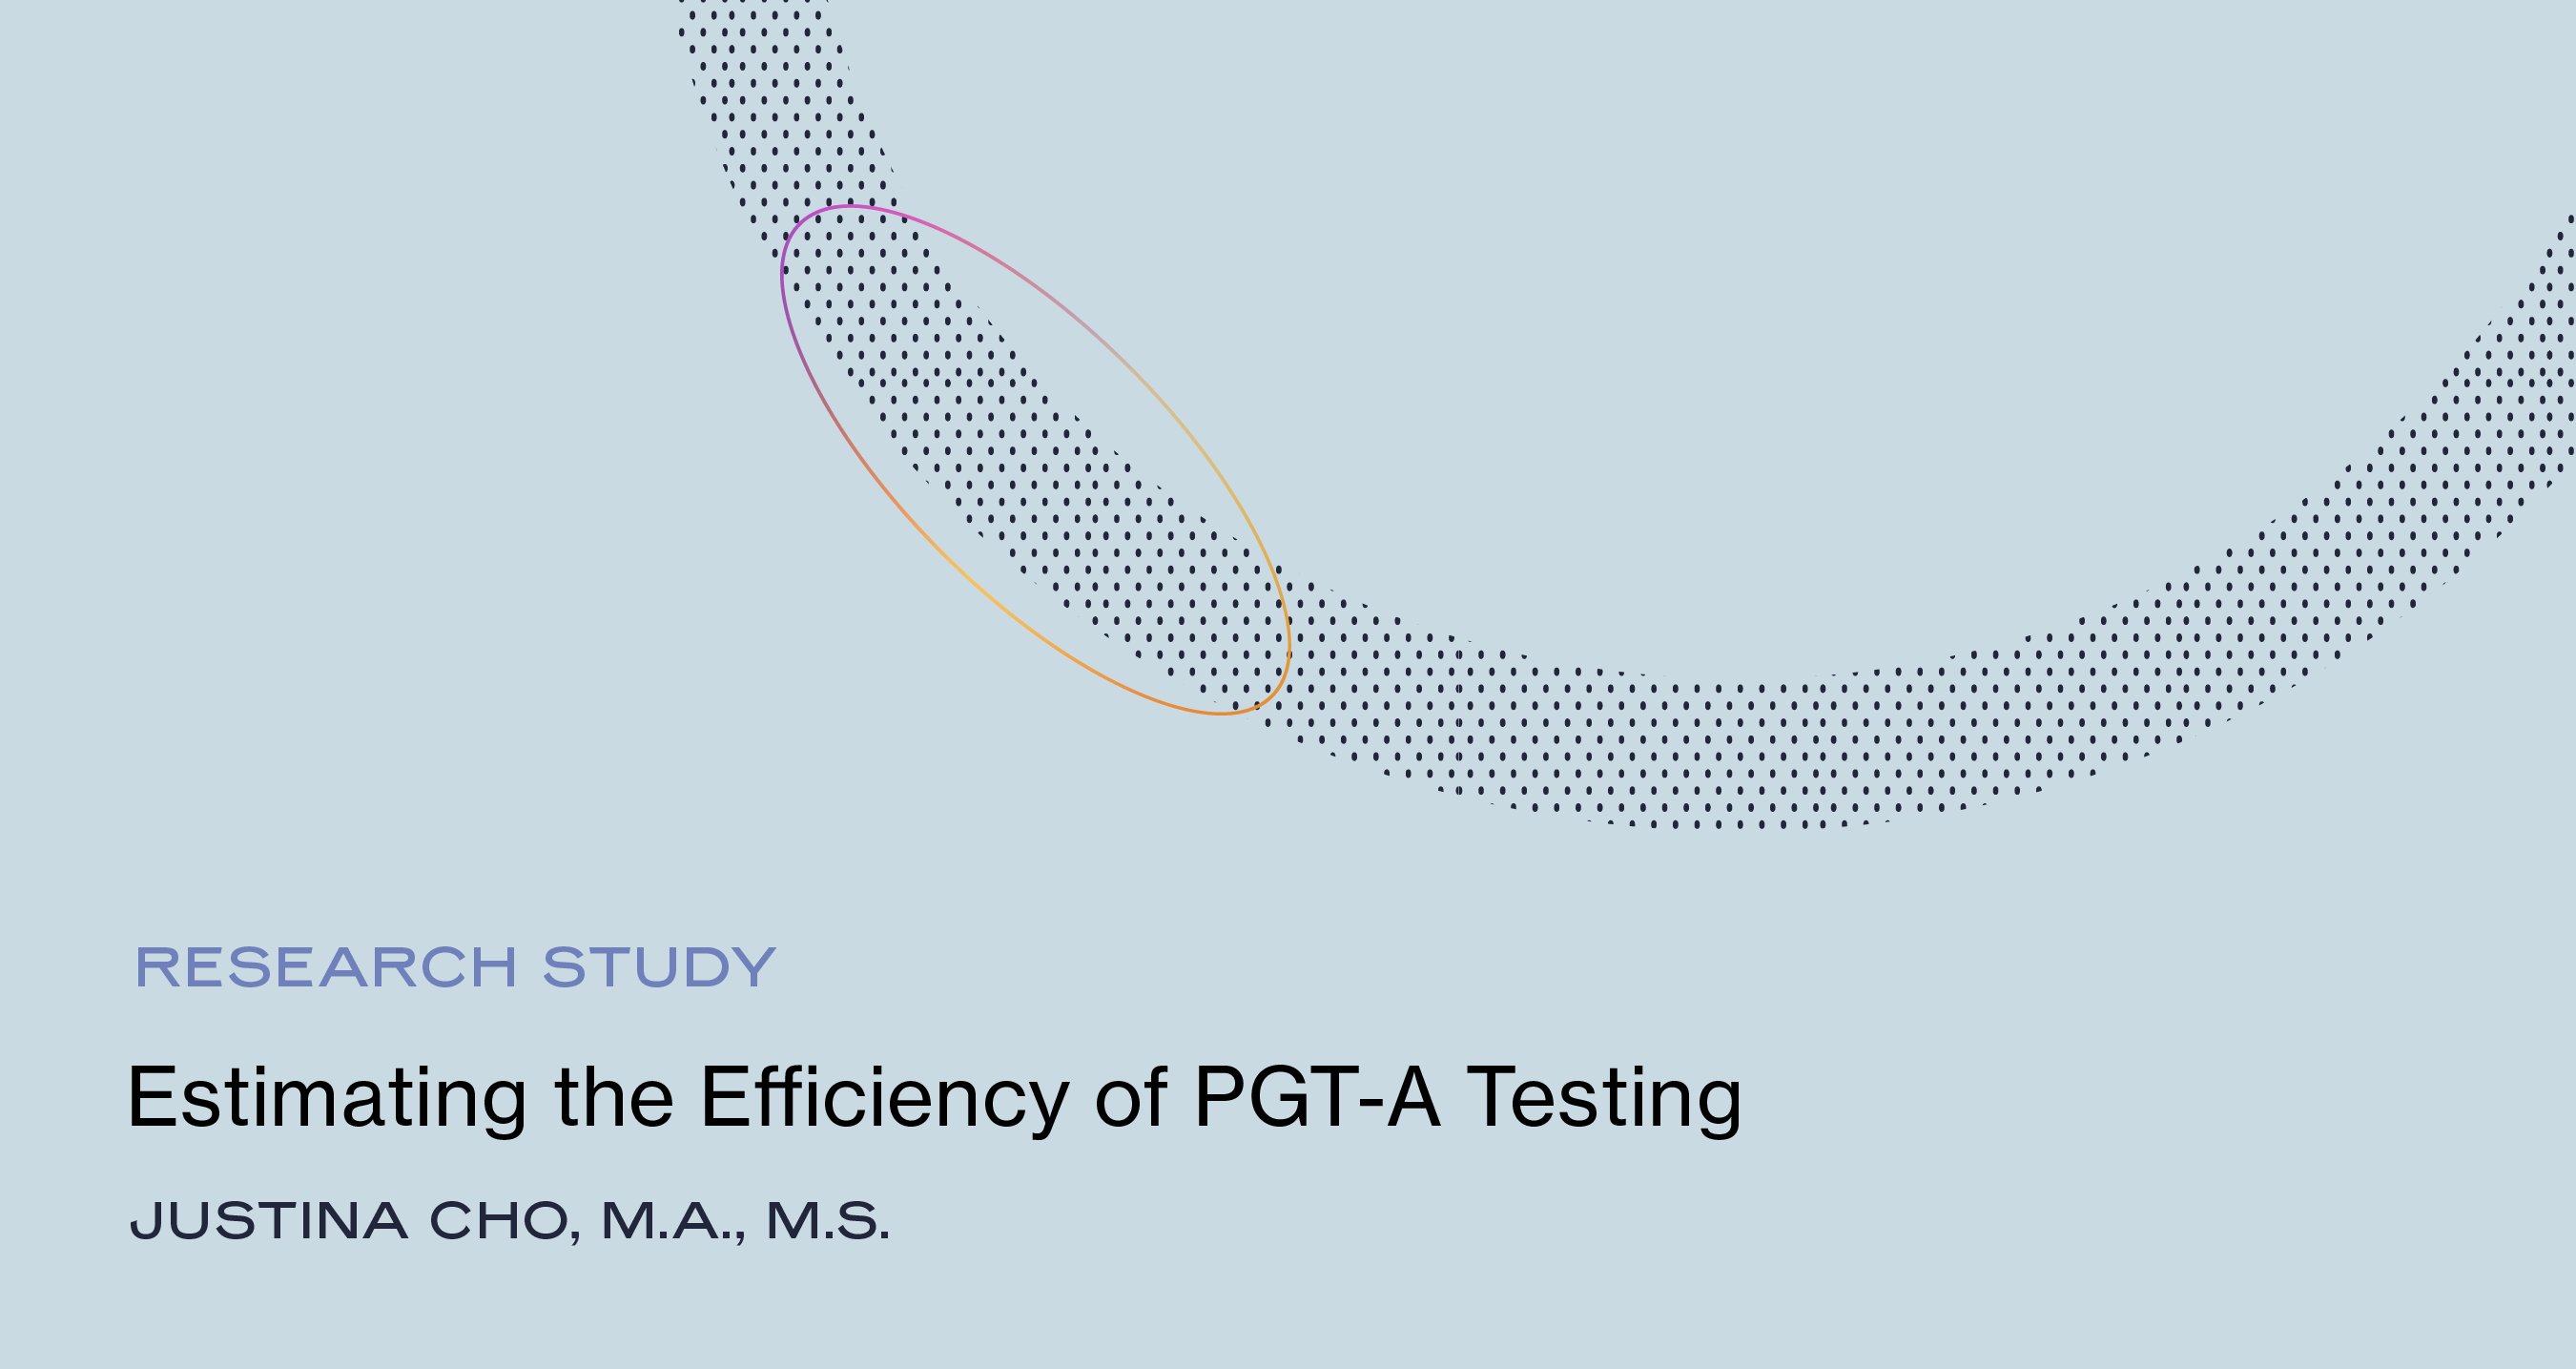 How Often Does PGT-A Testing Affect Embryos?